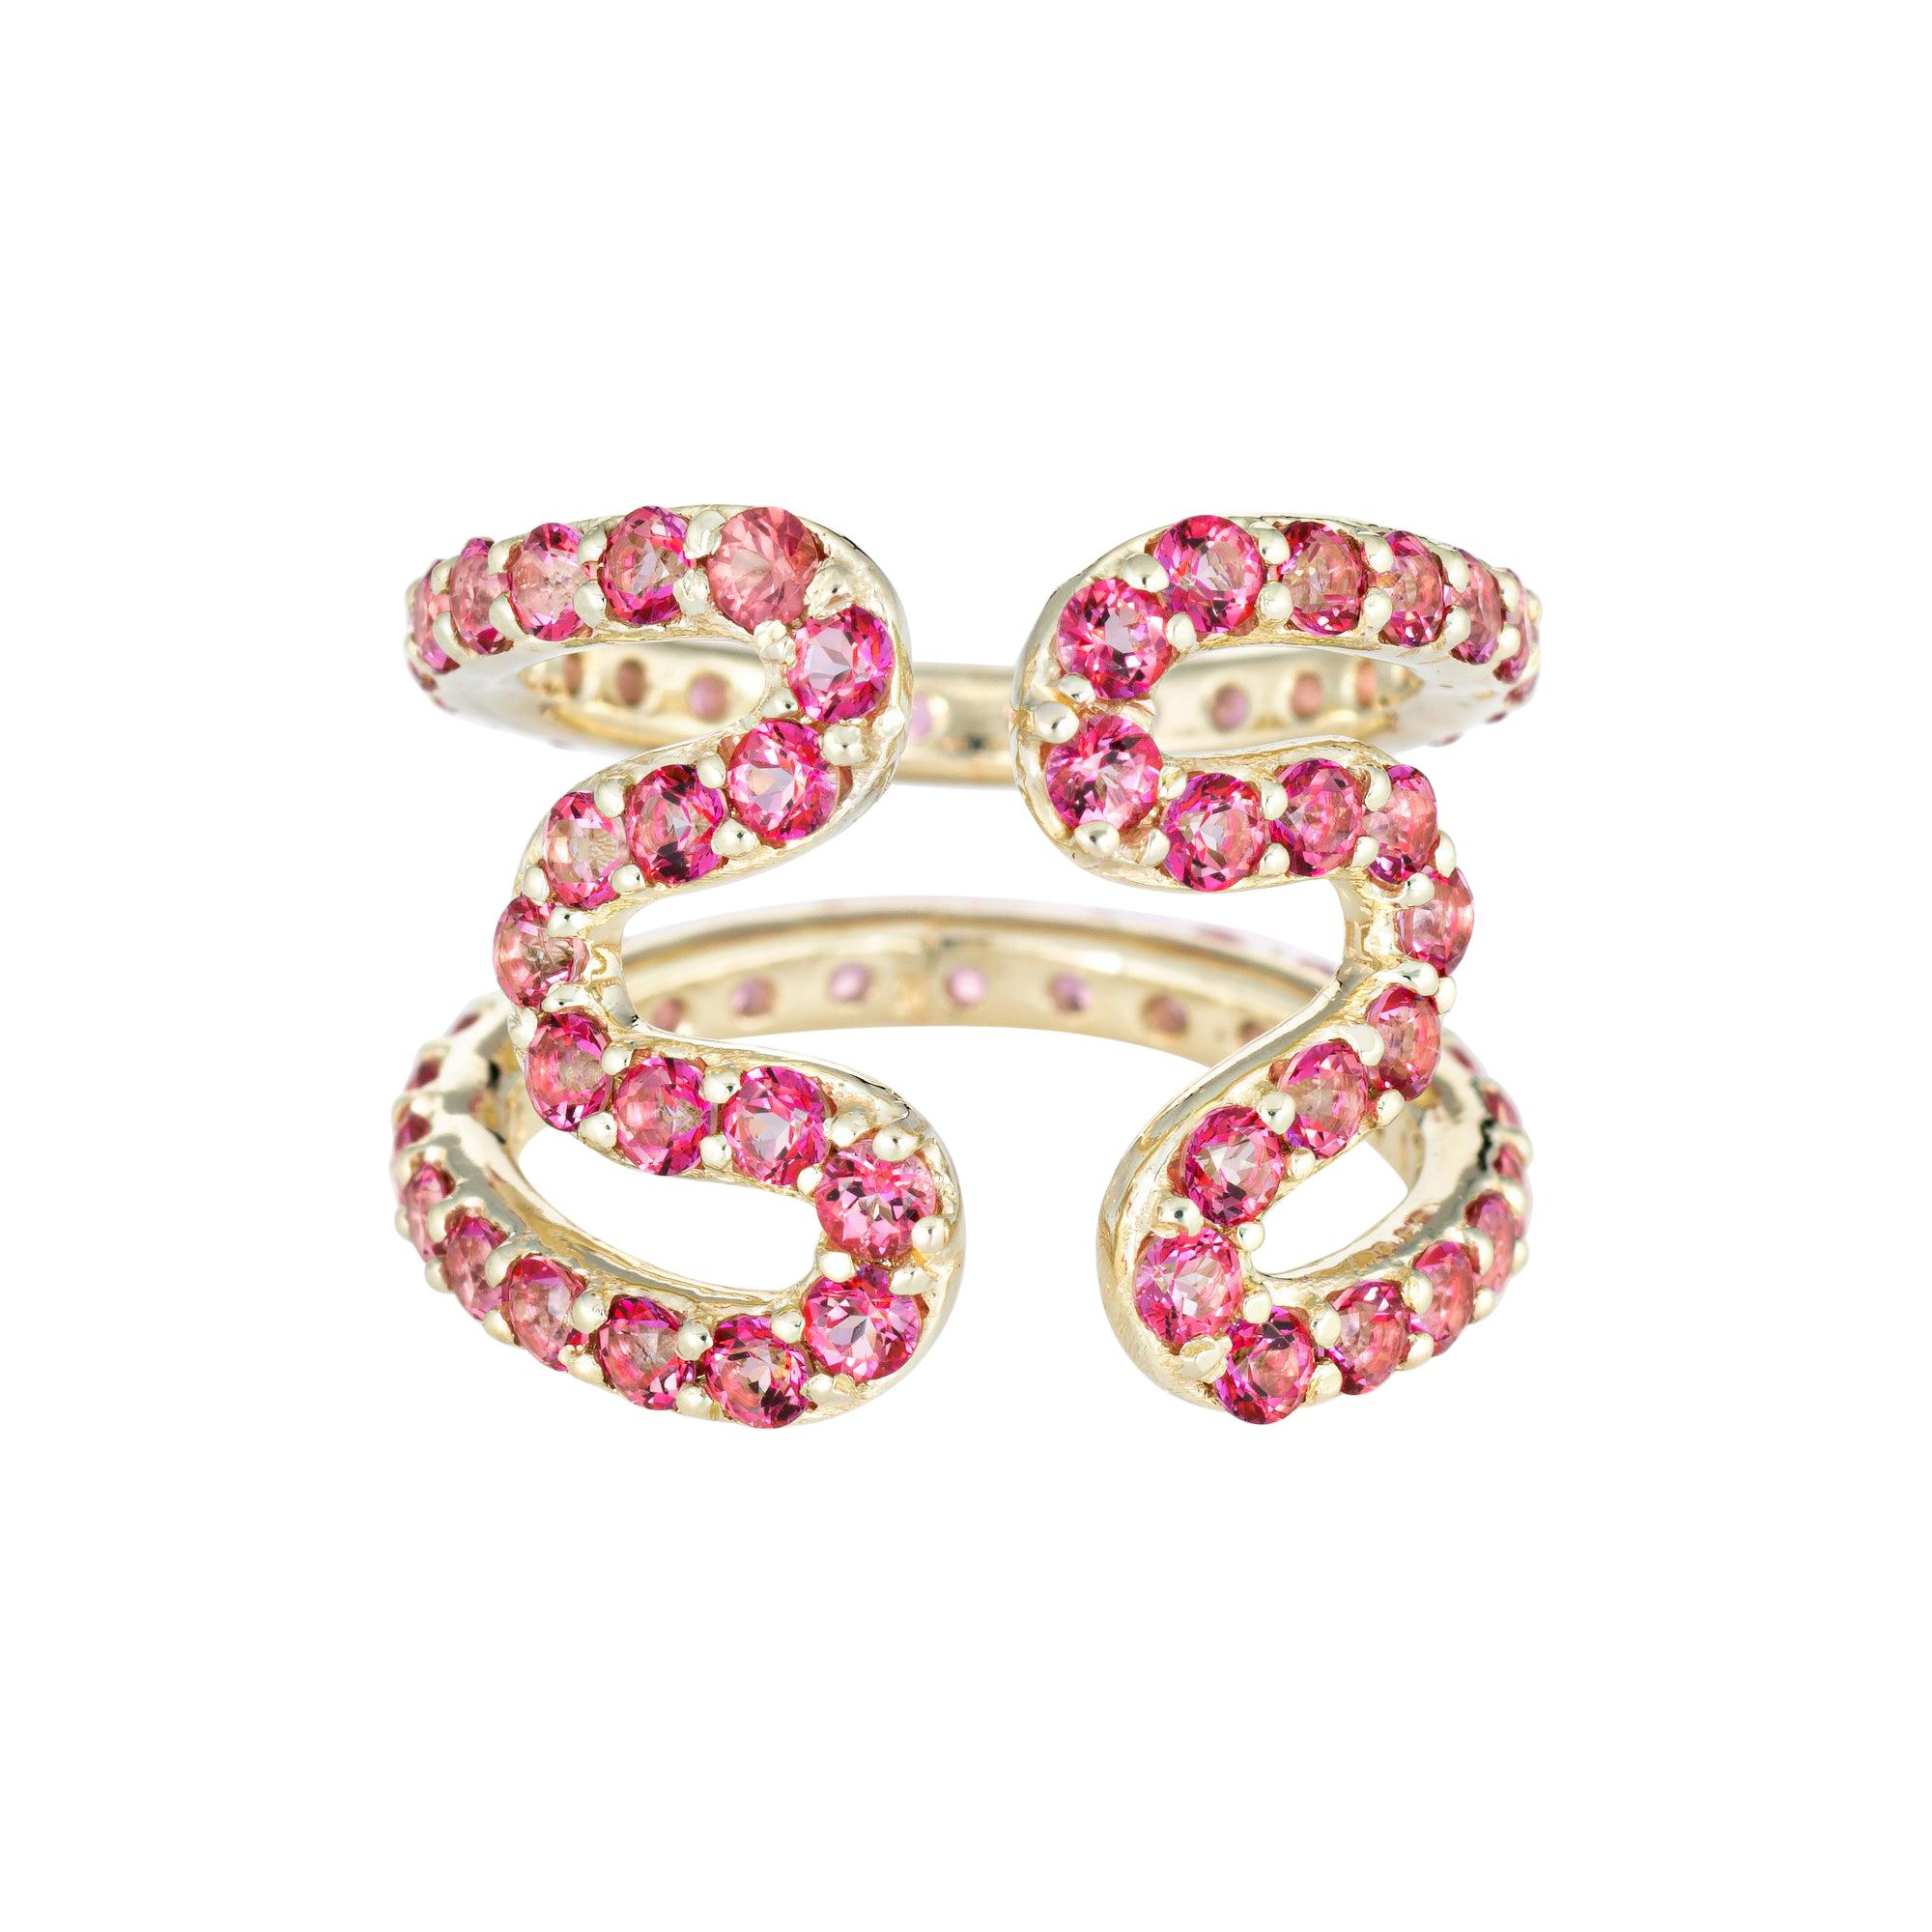 Sabine Getty Pink Topaz Wiggly Ring Estate 18 Karat Yellow Gold Wave Jewelry For Sale